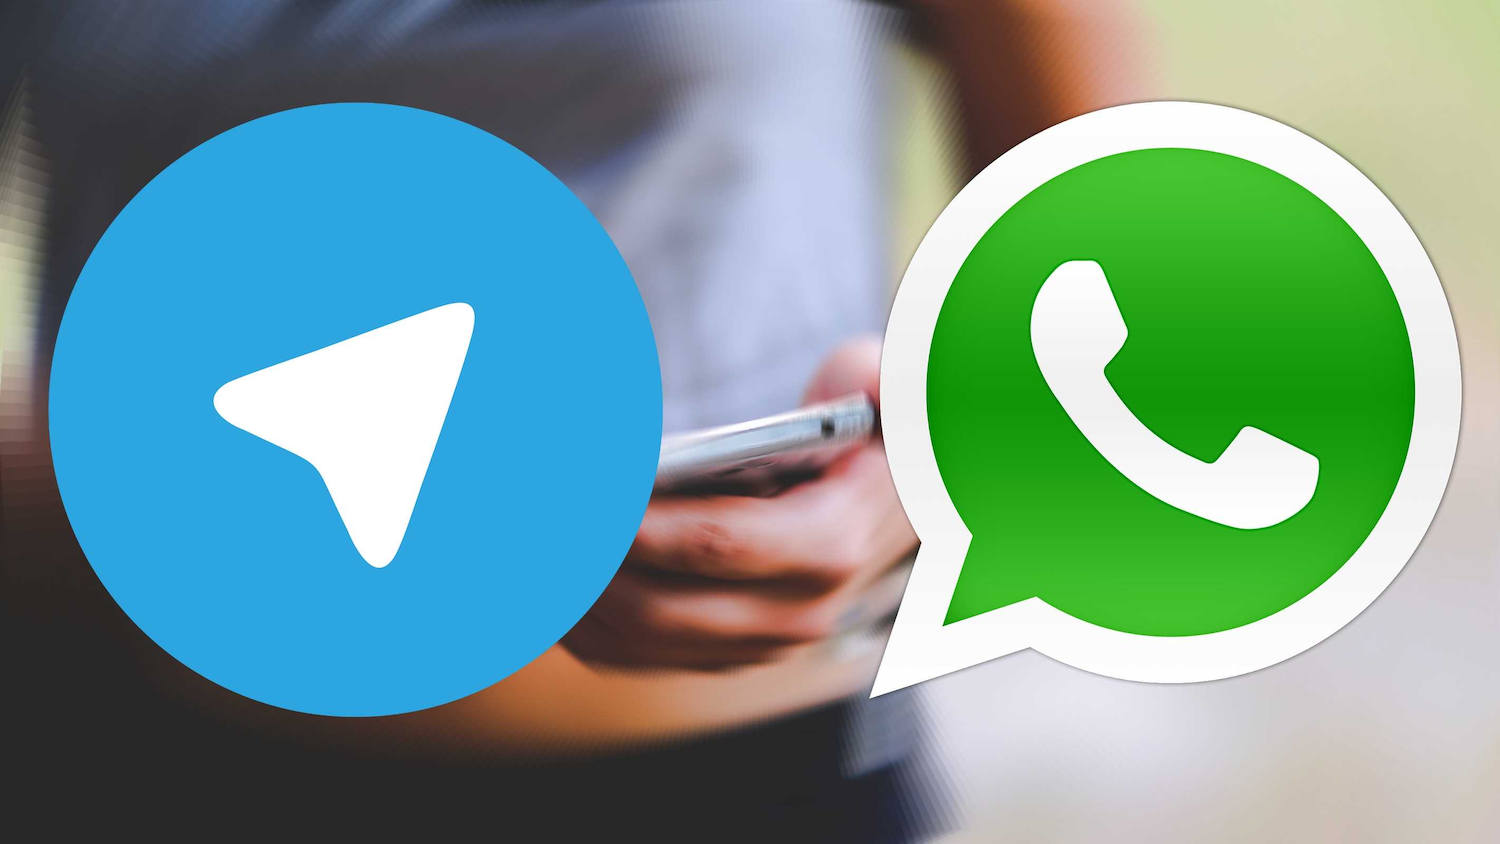 WhatsApp may launch a tool that displays Telegram messages